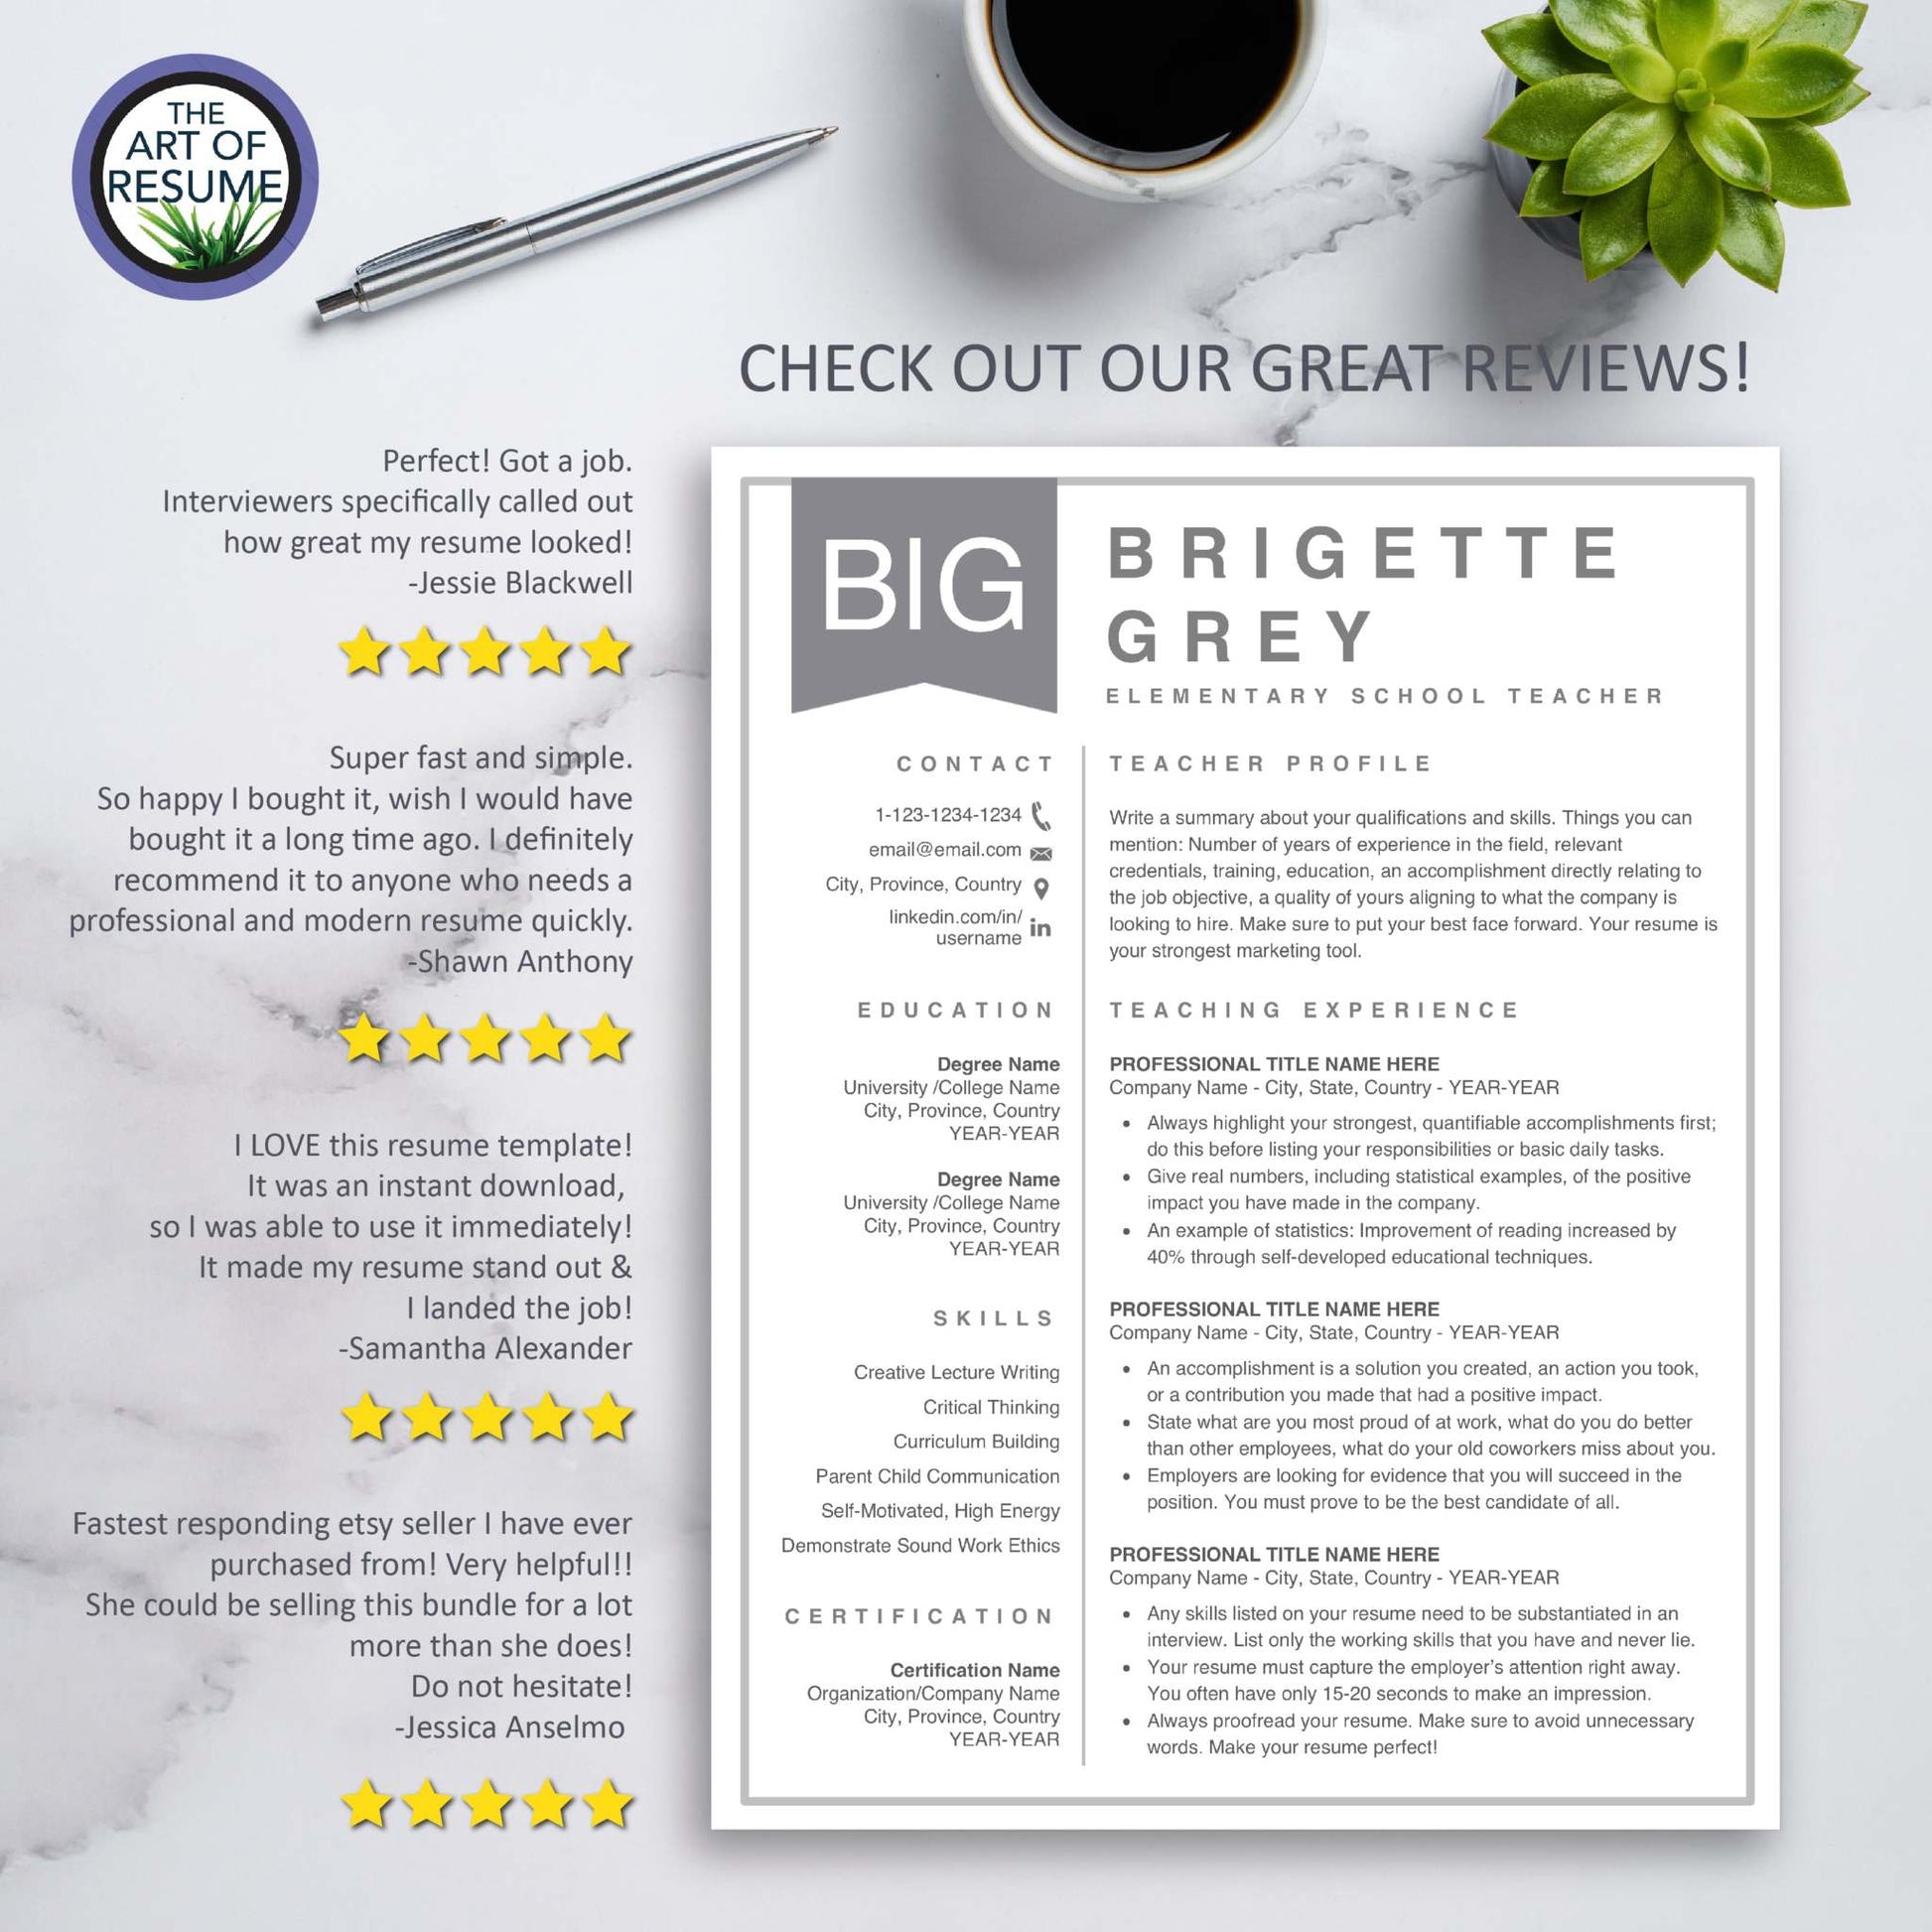 Resume Reviews - The Art of Resume - Curriculum Vitae, Resumes, CV Templates for Teacher with Free Cover Letter